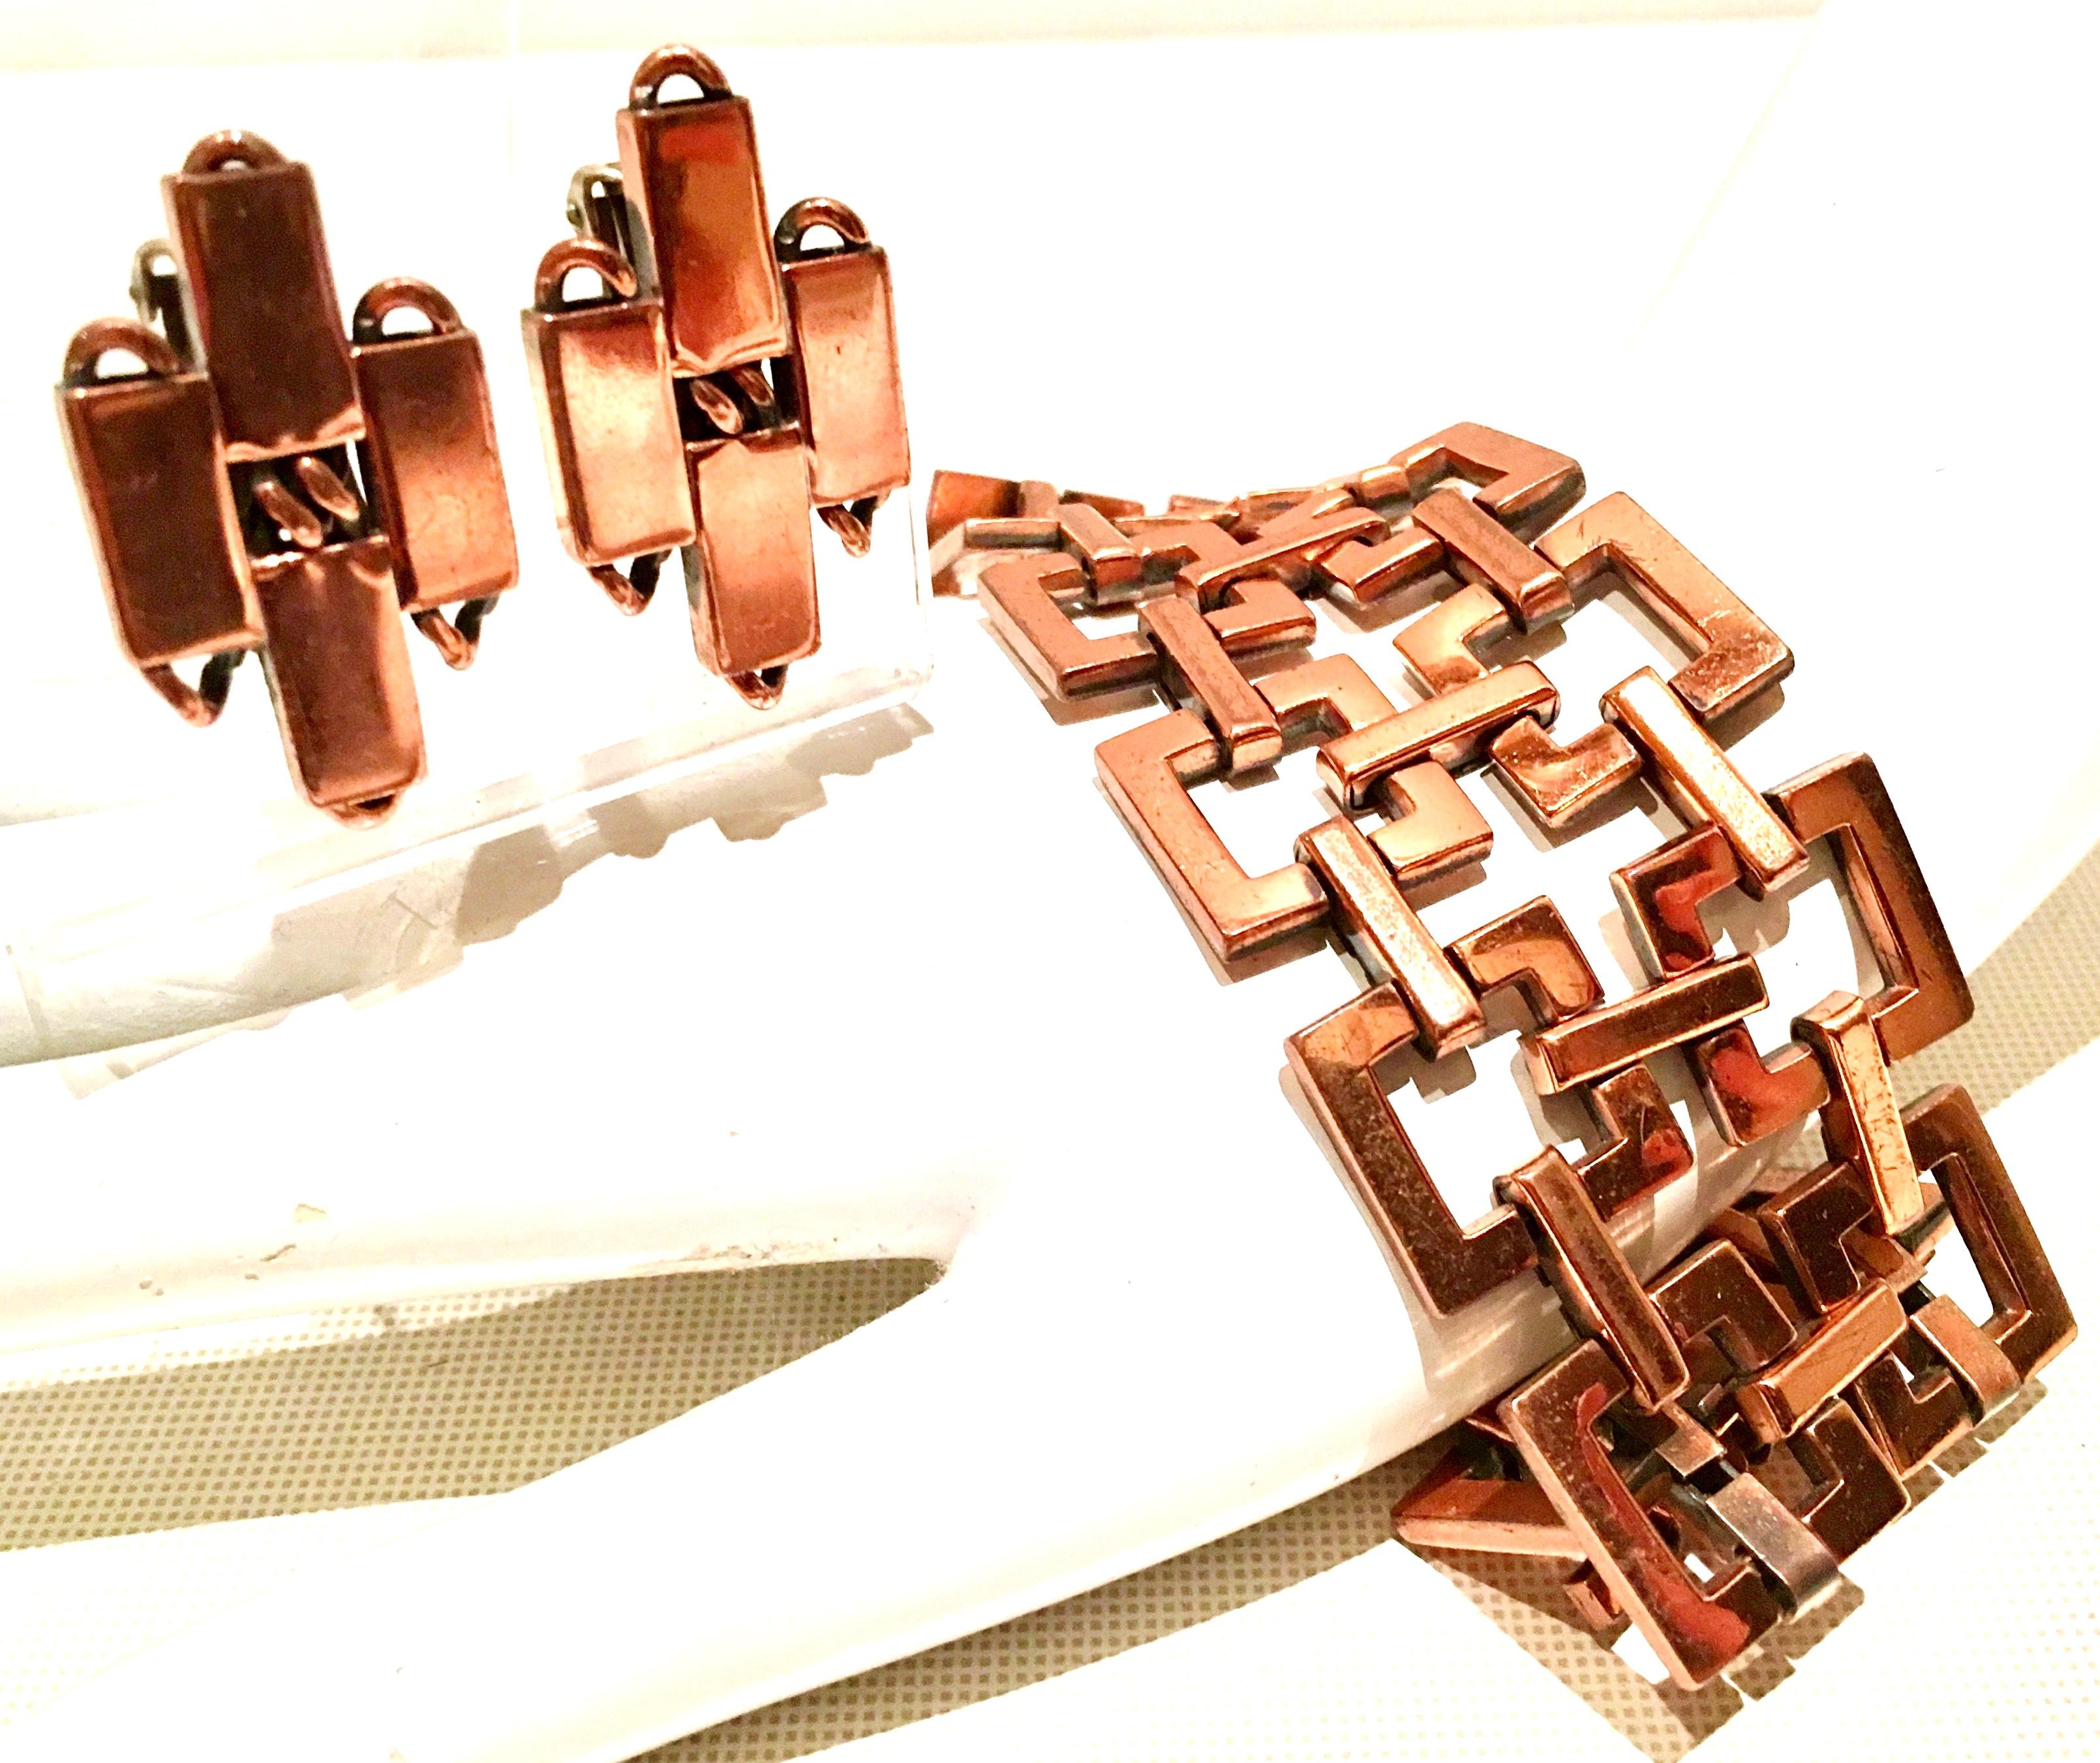  1950'S Matisse Renoir copper modernist geometric chain link bracelet and earring, three piece set. What makes these Mid-Century Era designed pieces current today is the 